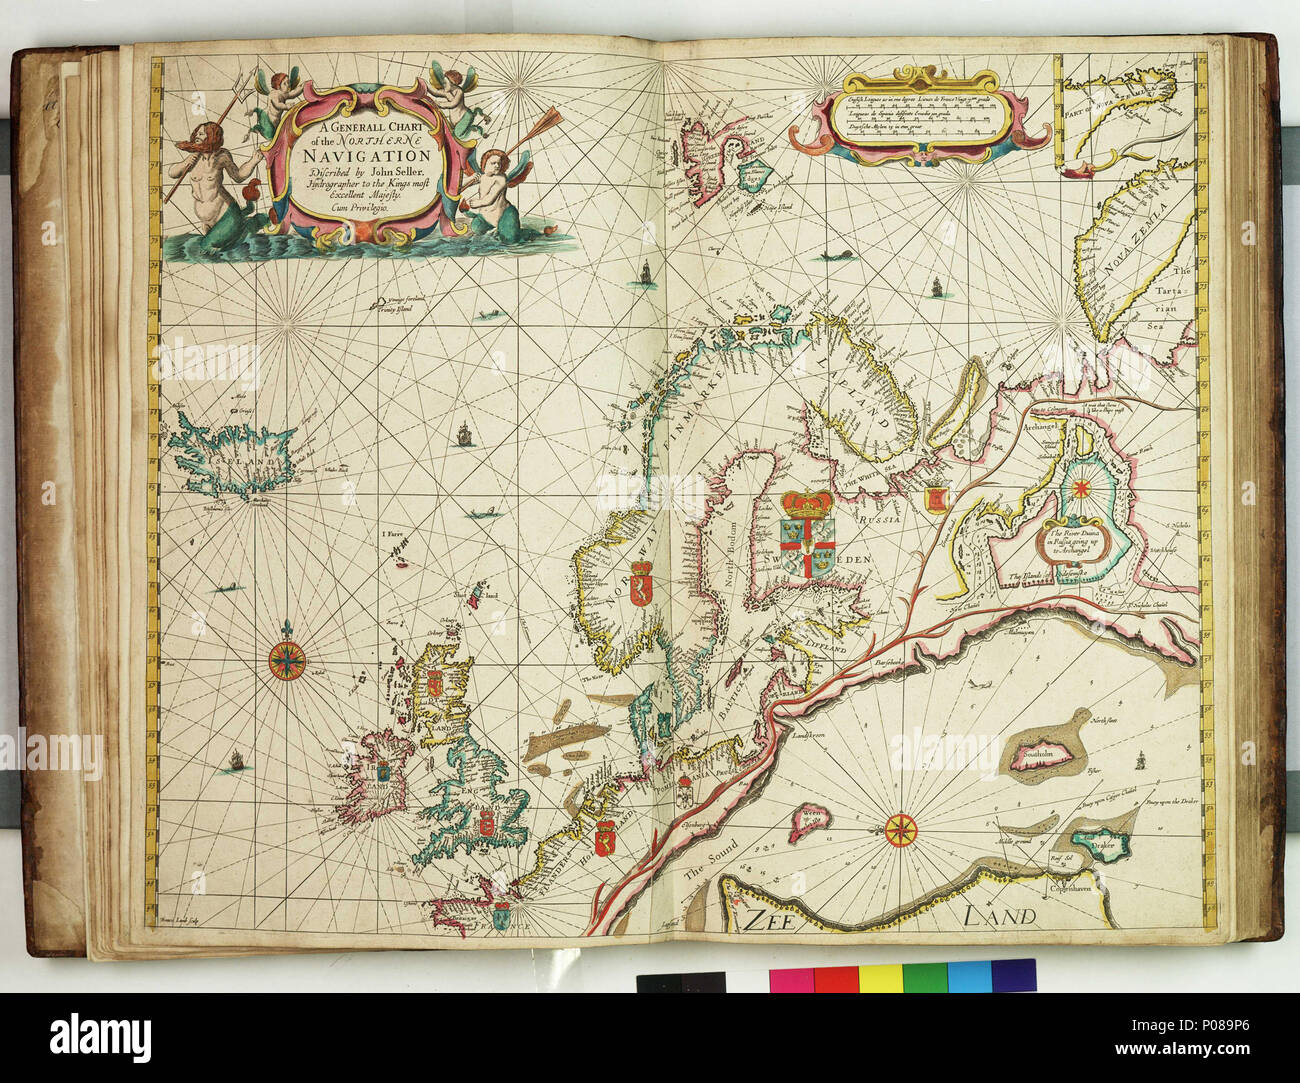 .  English: A generall chart of the northerne navigationBound sheet. Hand col engr. Scale: [ca. 1:9 000 000 (bar)]. Cartographic Note: Borders graduated for latitude. Bar scales in English and French leagues, Spanish leagues and Dutch miles. Additional Places: Northern Europe, Iceland, Greenland, Novaya Zemlya. Contents Note: There is a continuation of Nova Zemla inset at the same scale at the top right. There are two other insets at different, unstated, scales, separated by decorative tendrils: The River Dvina in Russia going up to Archangel [N at 226 degrees]; and The Sound [N at 272 degrees Stock Photo